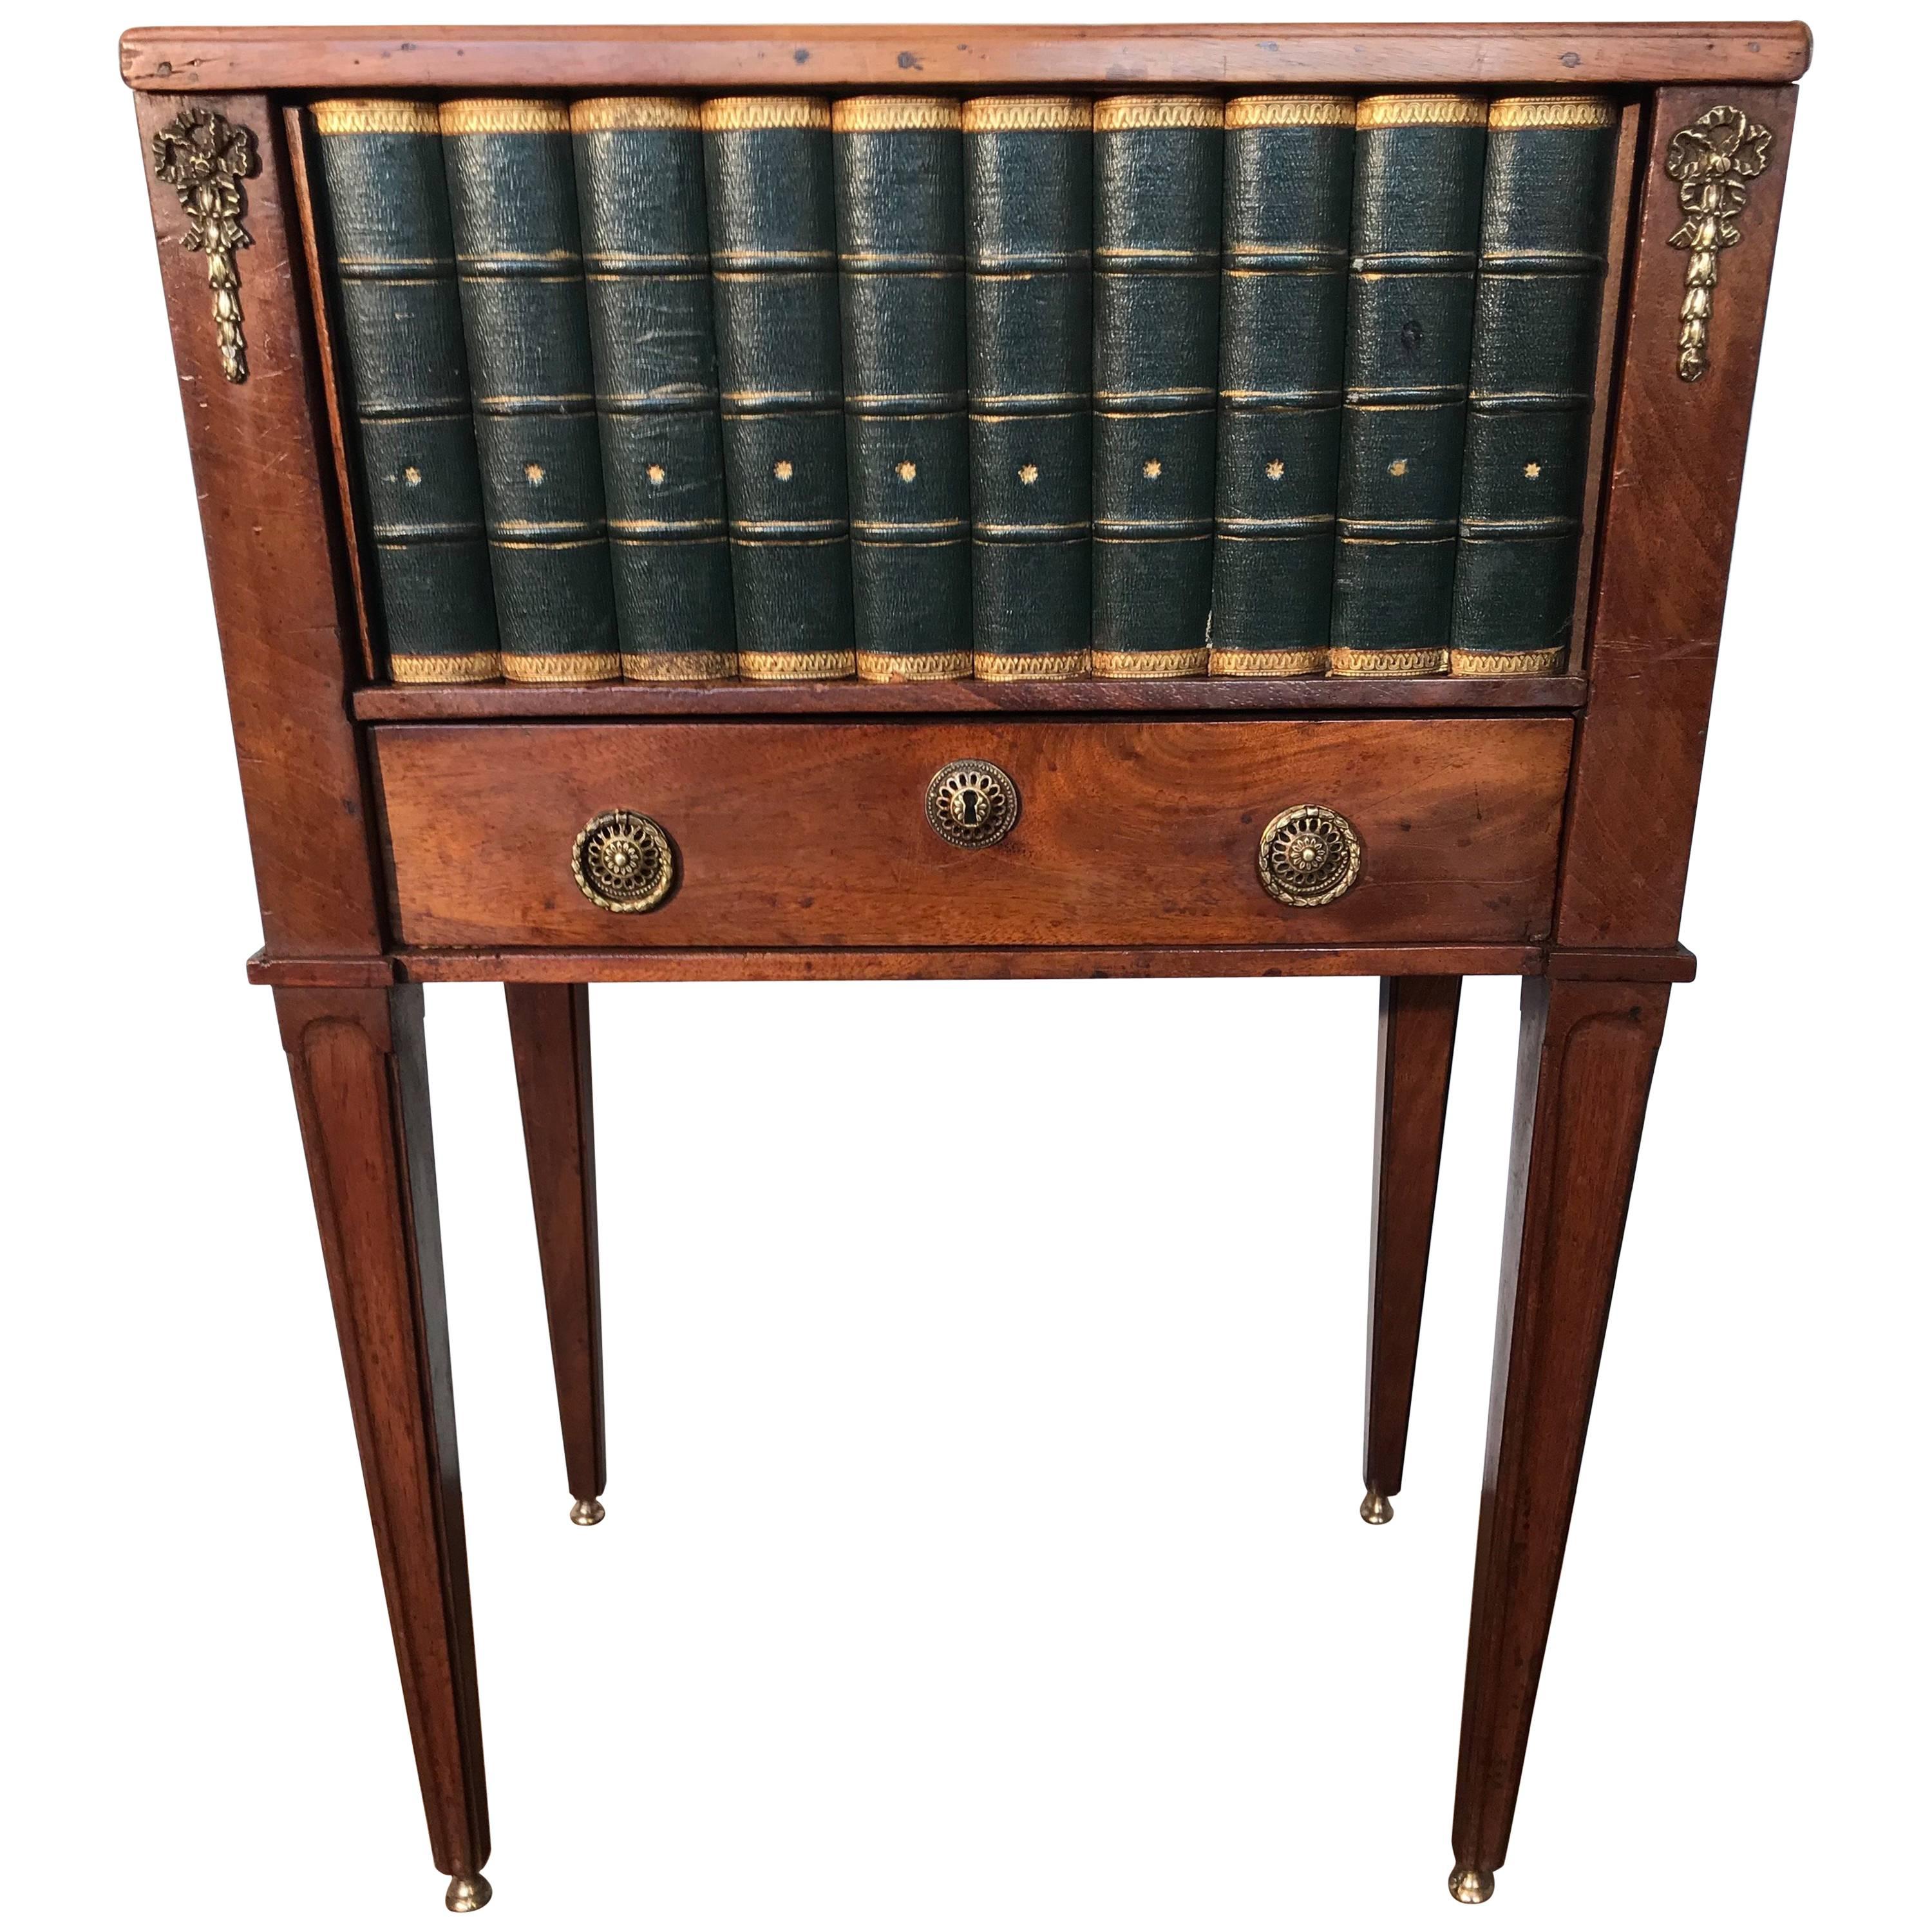 Empire Style Mahogany End Table with Faux Books Rolling Shutter Door and Drawer